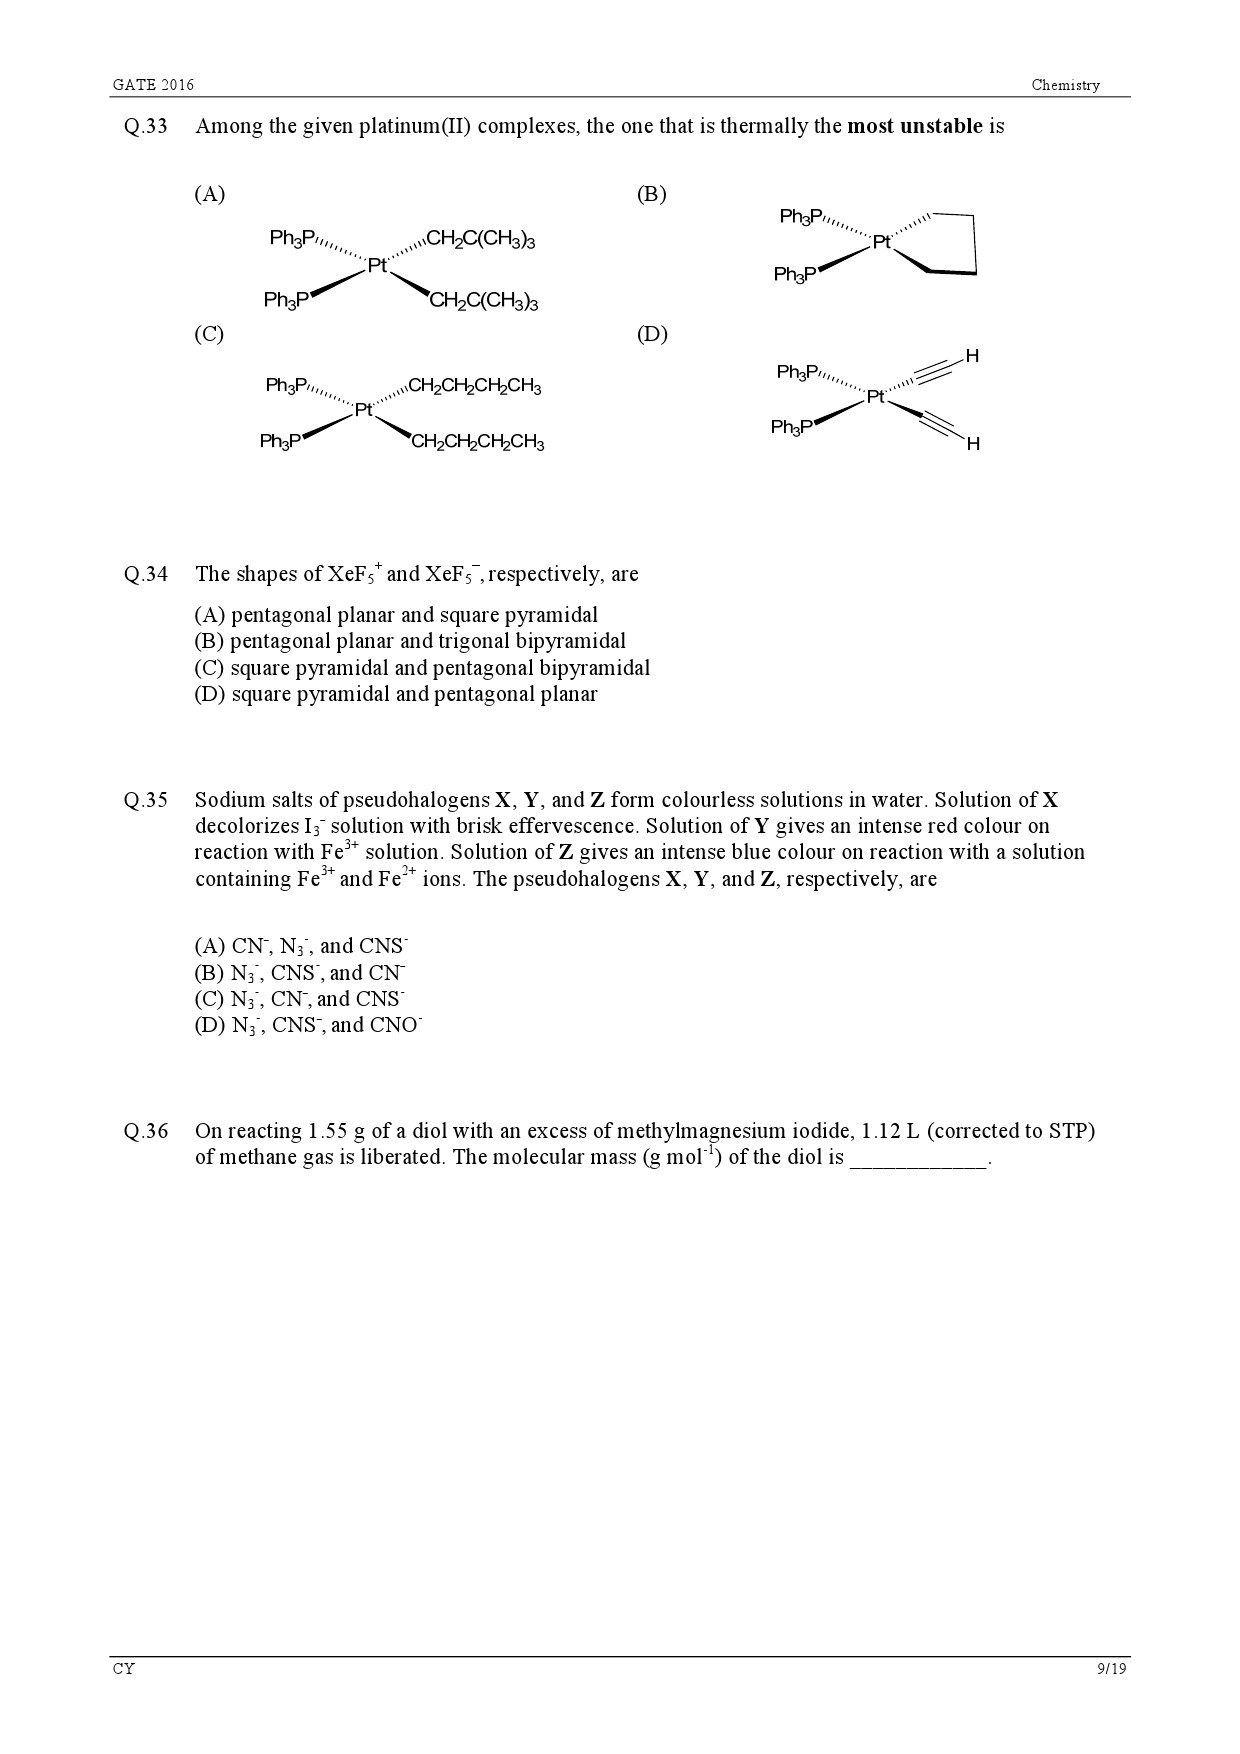 GATE Exam Question Paper 2016 Chemistry 12